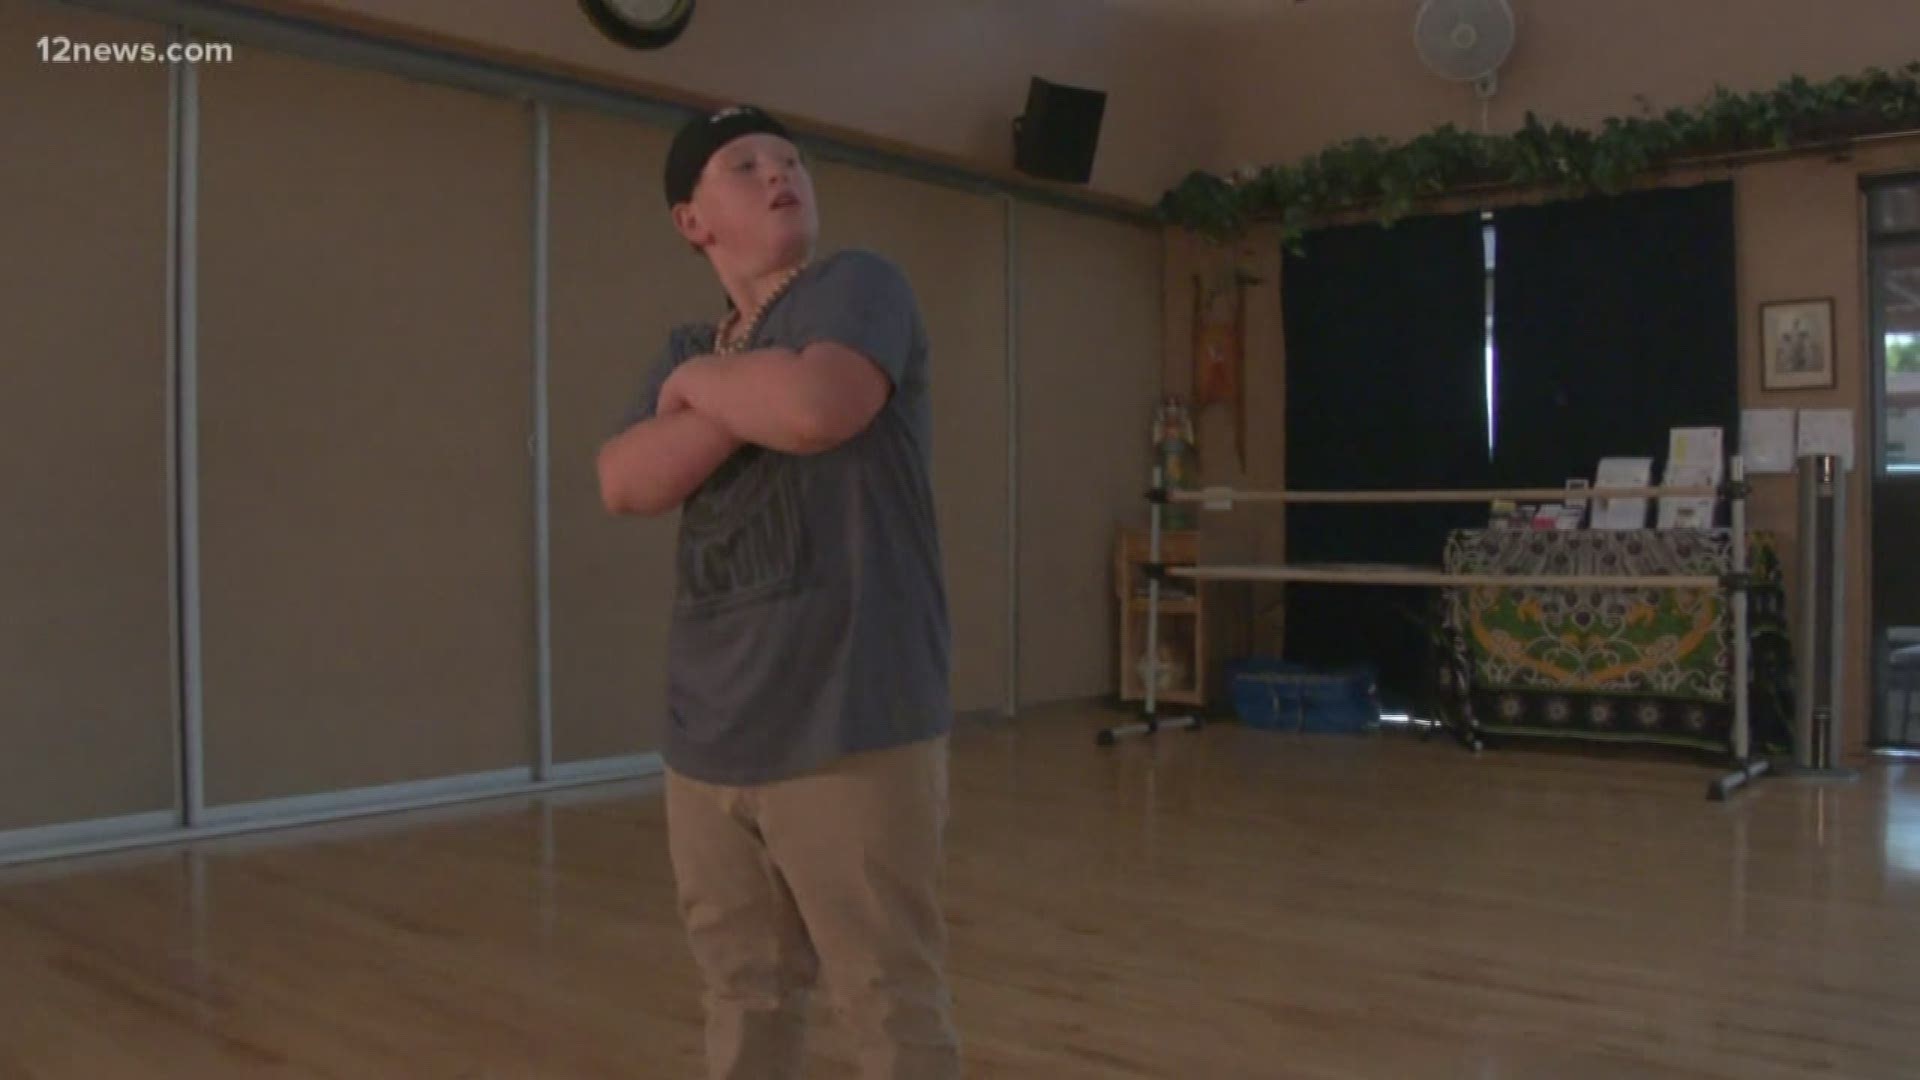 This week we're introducing you to Ryan. Learn more about him and his love of dancing in the latest Wednesday's Child.